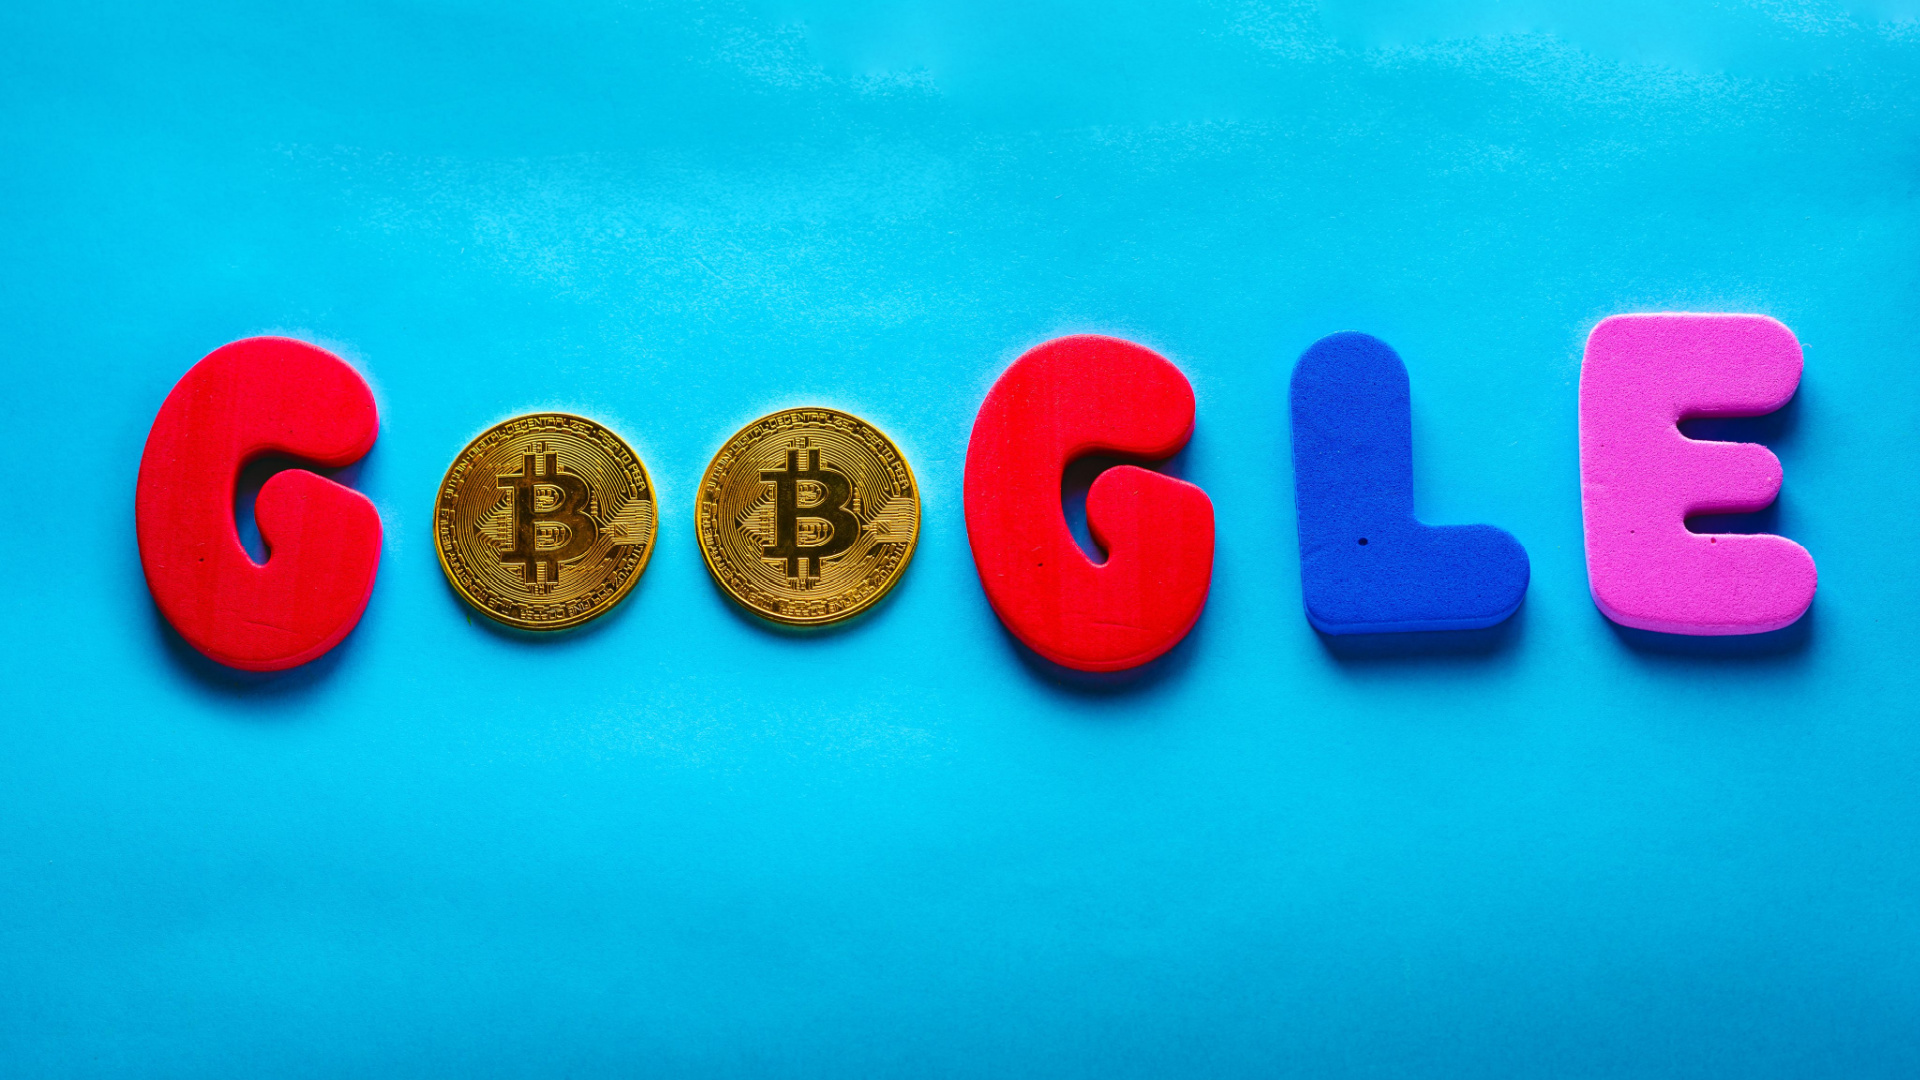 Google Cloud partners with Coinbase to launch crypto payment option